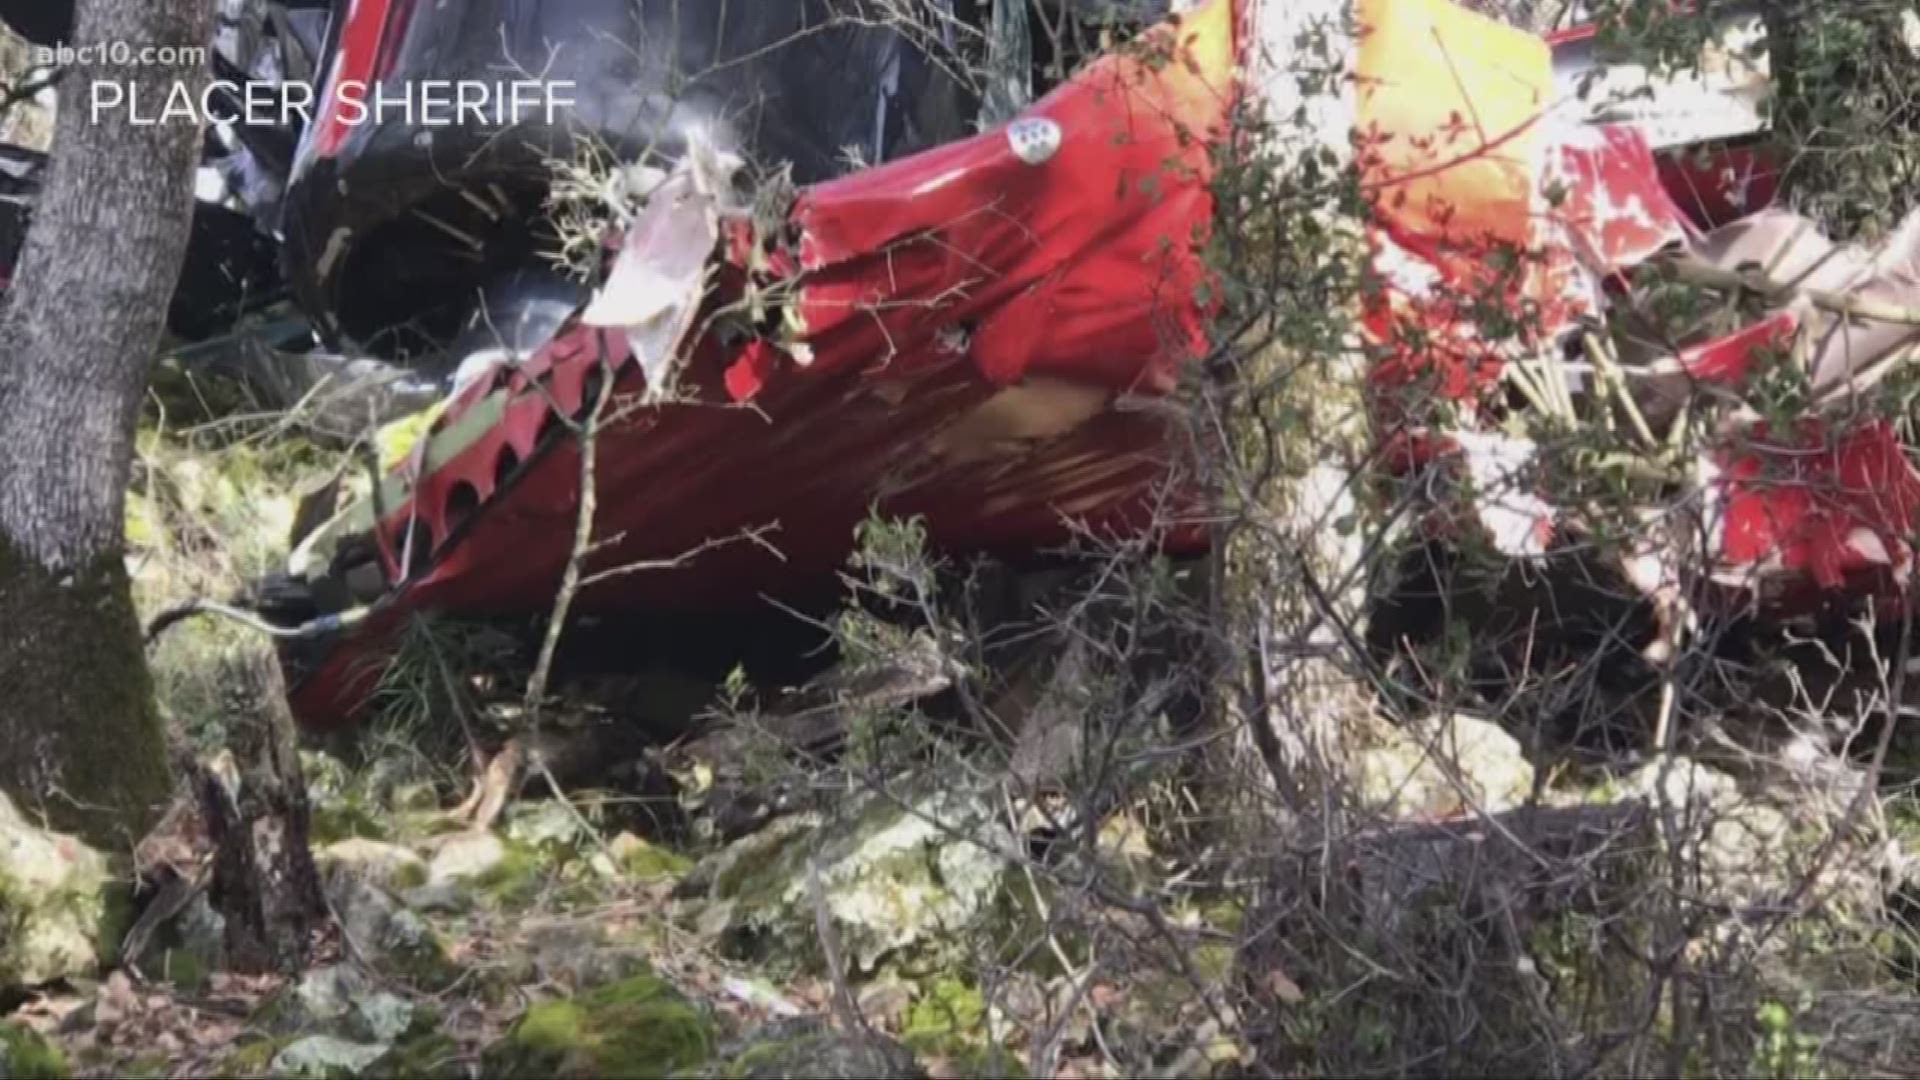 According to investigators, the plane crashed wing-first into the trees and was “extremely mangled” by the time first responders made it to the scene.